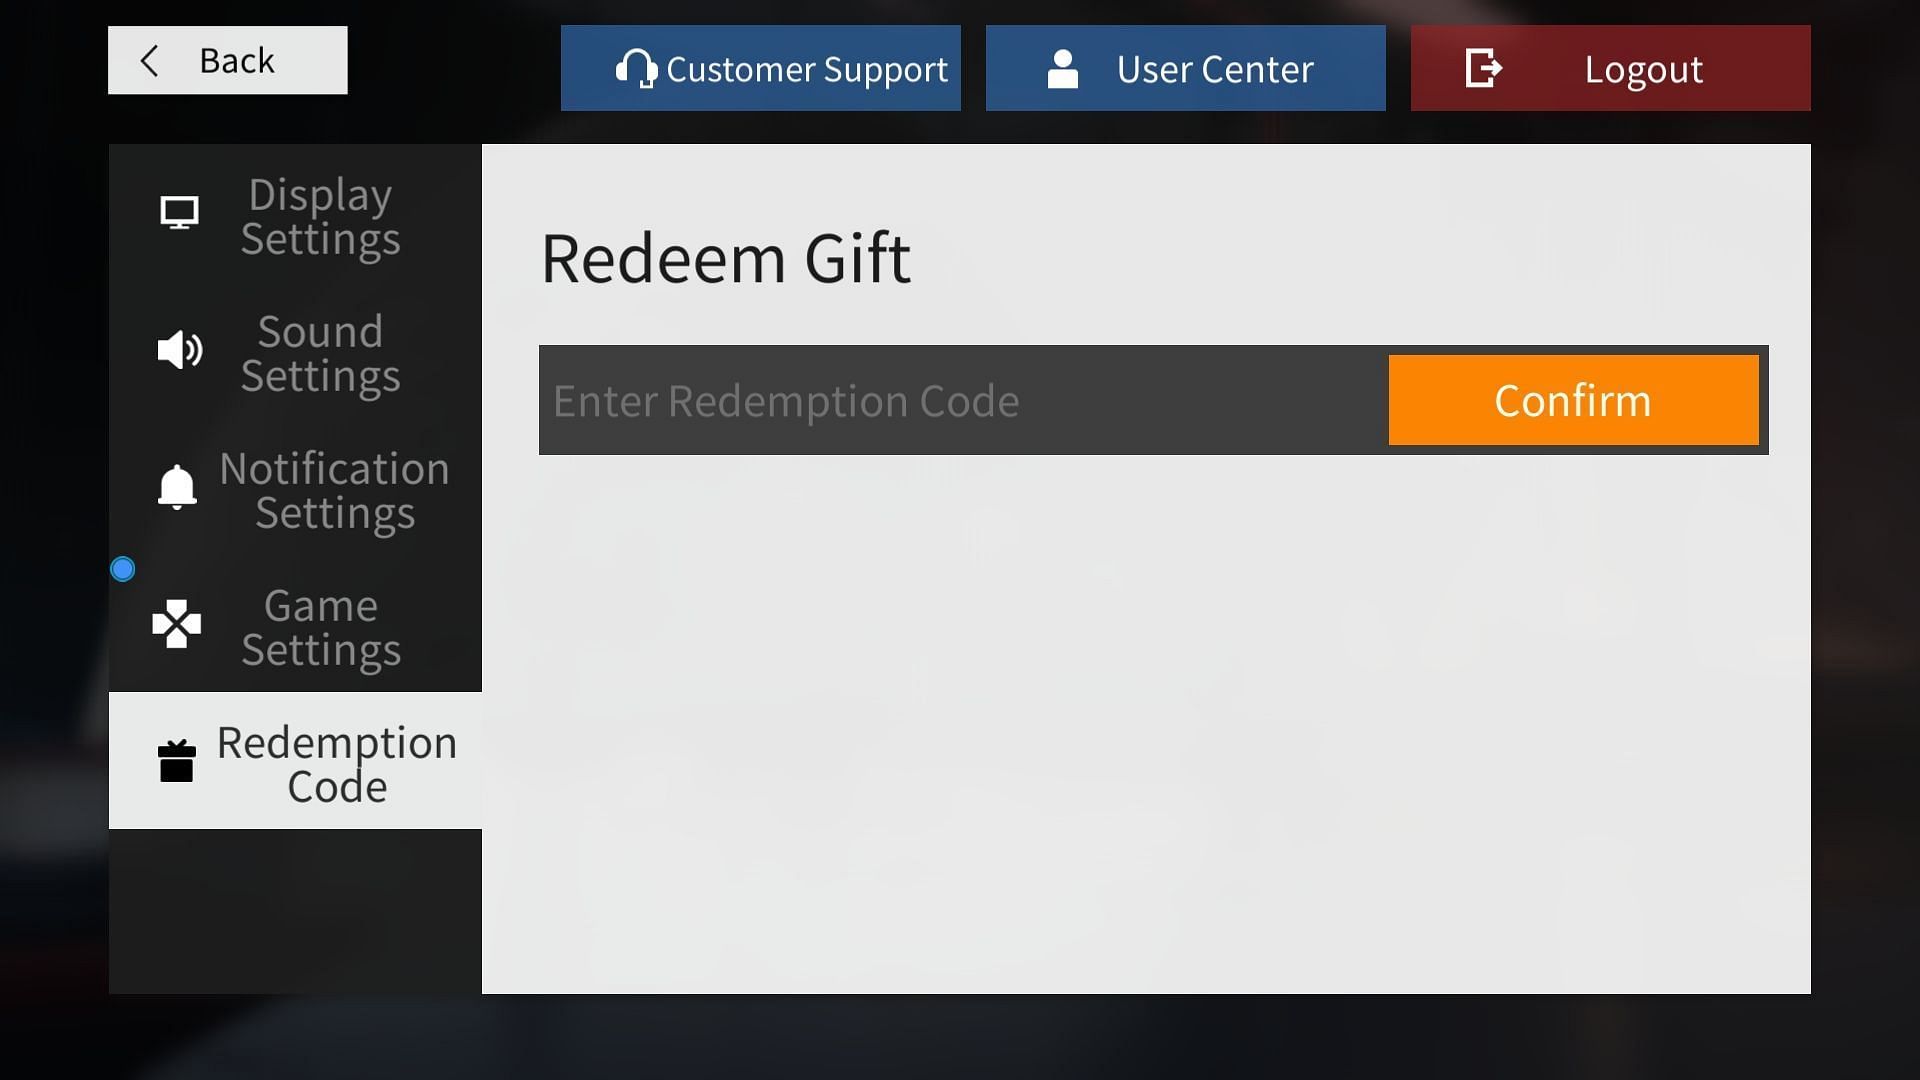 Enter the code and hit confirm to claim all rewards. (Image via Sunborn)